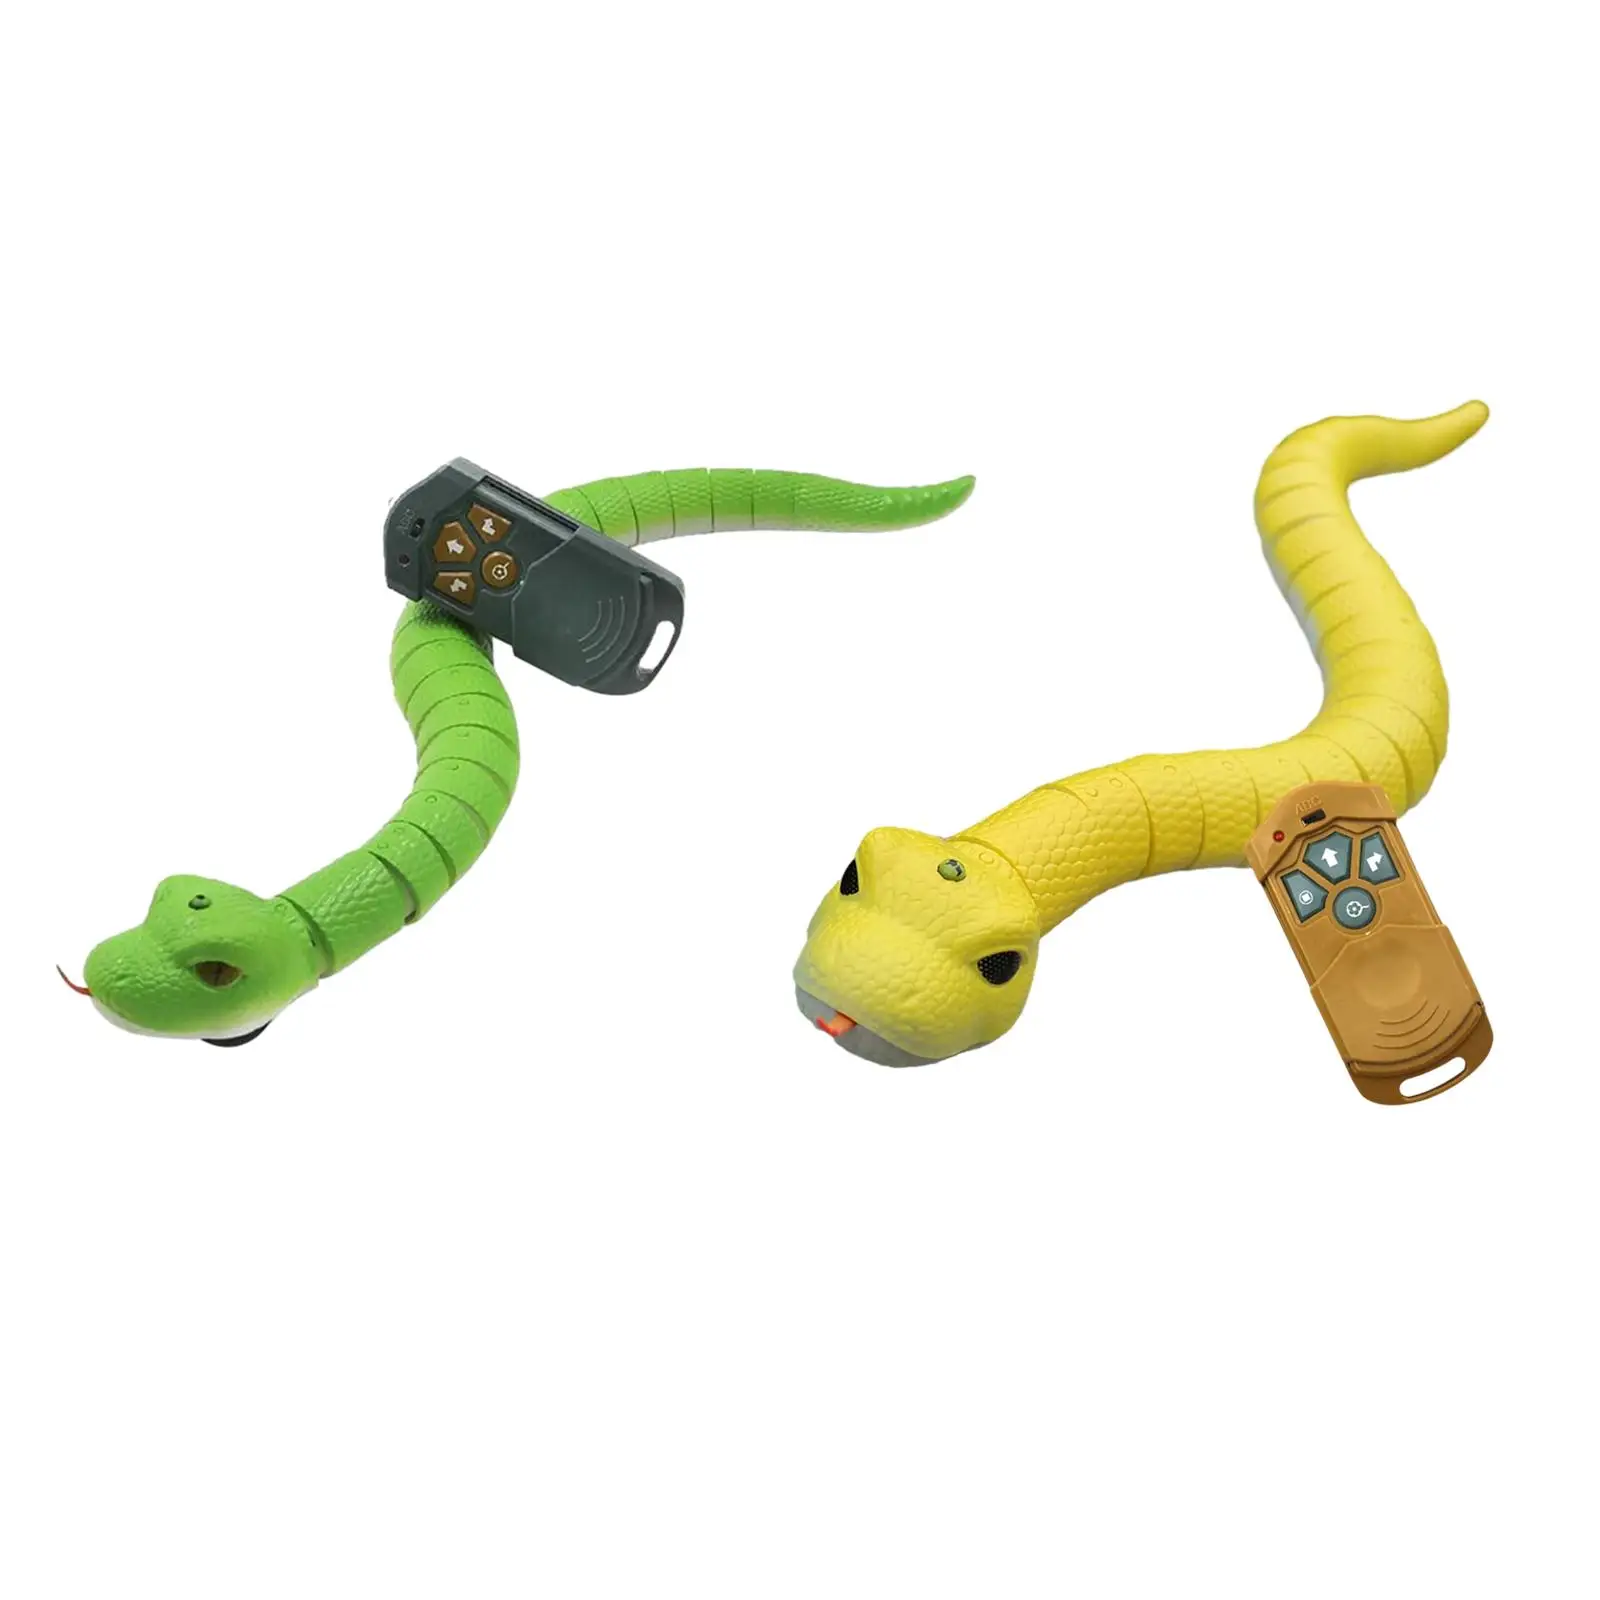 Remote Control Snake Toy Moves RC Realistic Snake Toy for April Fools` Day Practical Jokes Stage Props Tricks Birthday Gift